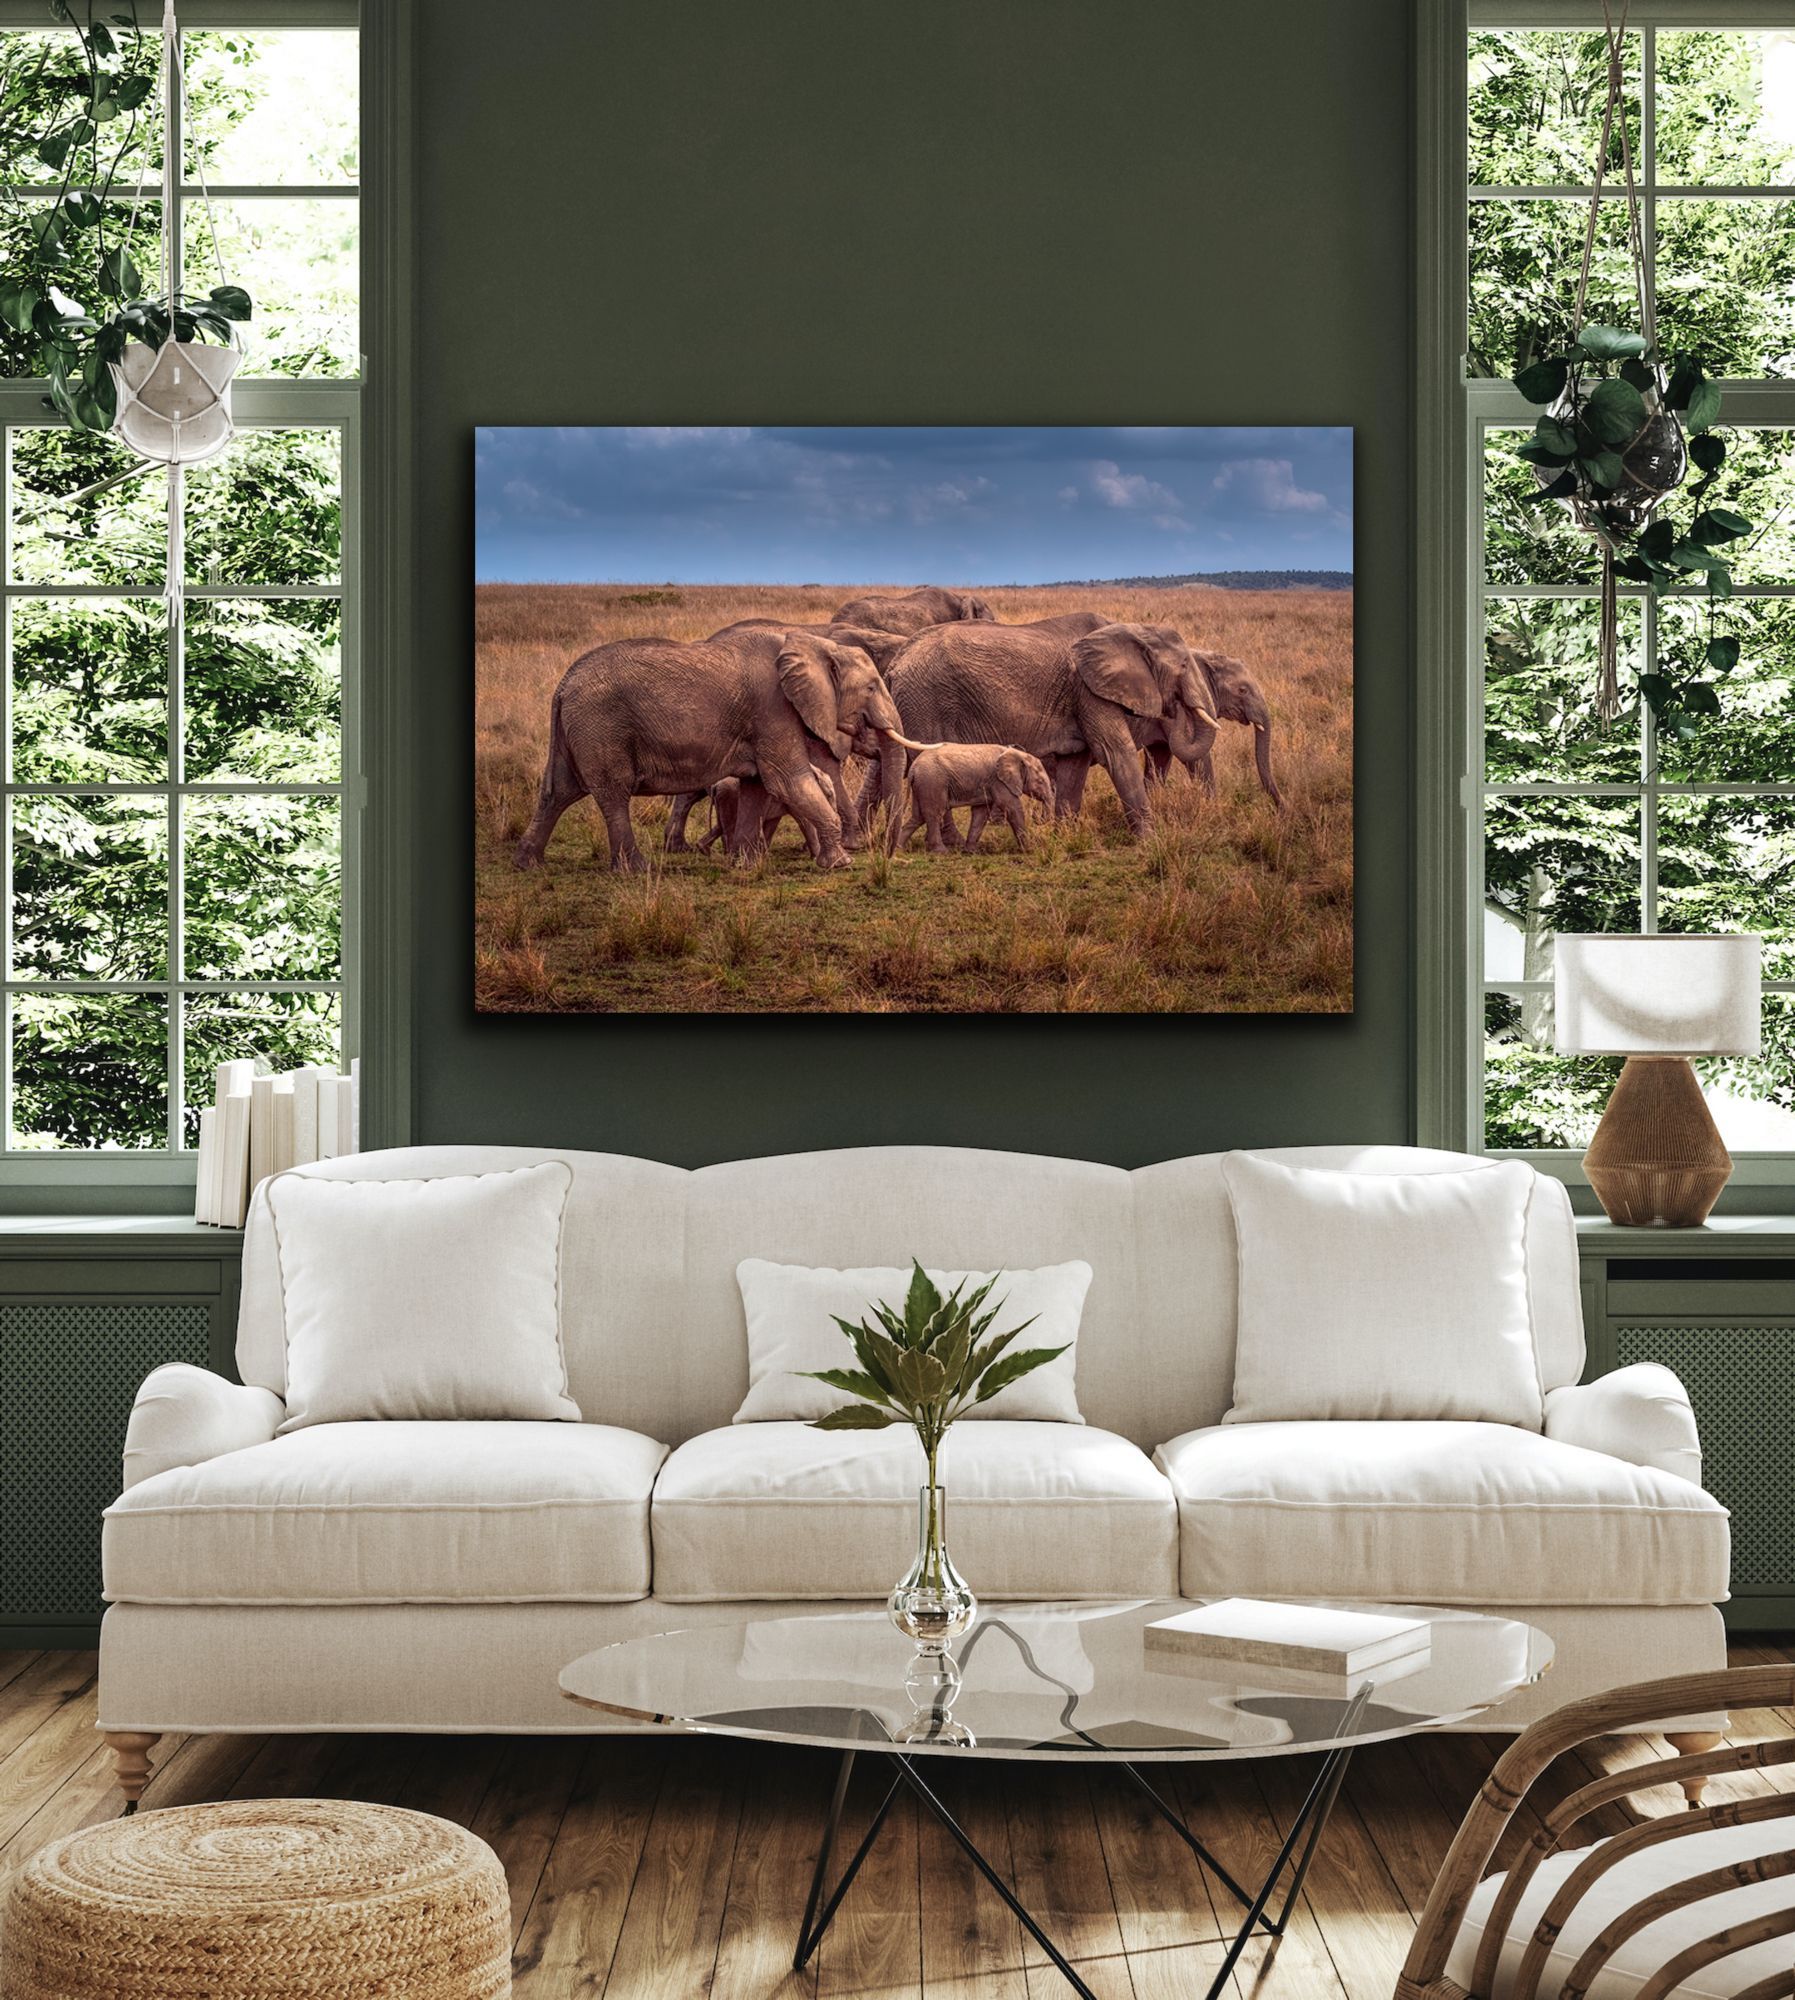 Example of image # Elephant GP BKT2845 on a wall in a modern home